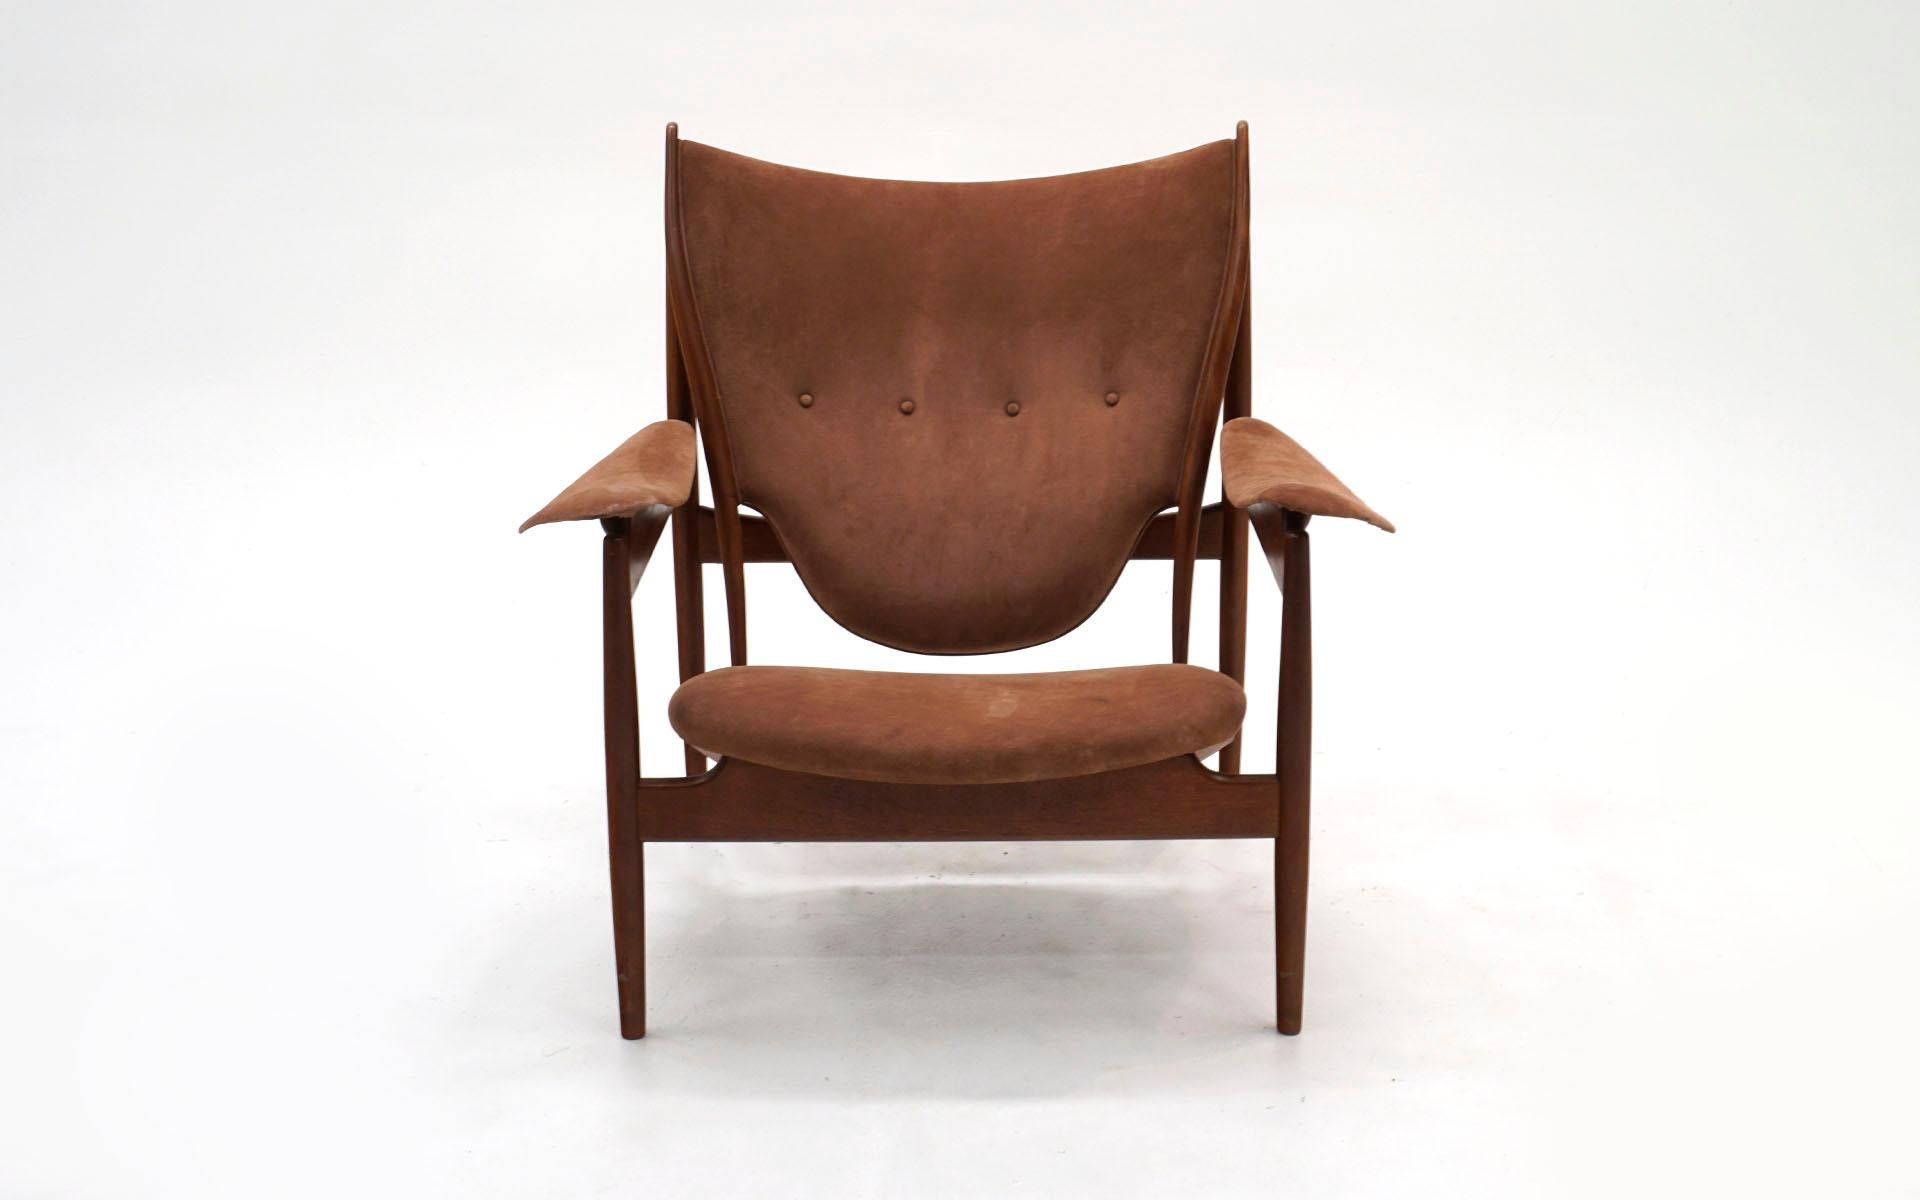 Rare, early, and most desirable Finn Juhl Chieftain lounge chair made by cabinet maker Niels Vodder. Solid teak frame with no evidence of repairs. Suede upholstery is likely not original but nicely done.

Branded manufacturer's mark to underside